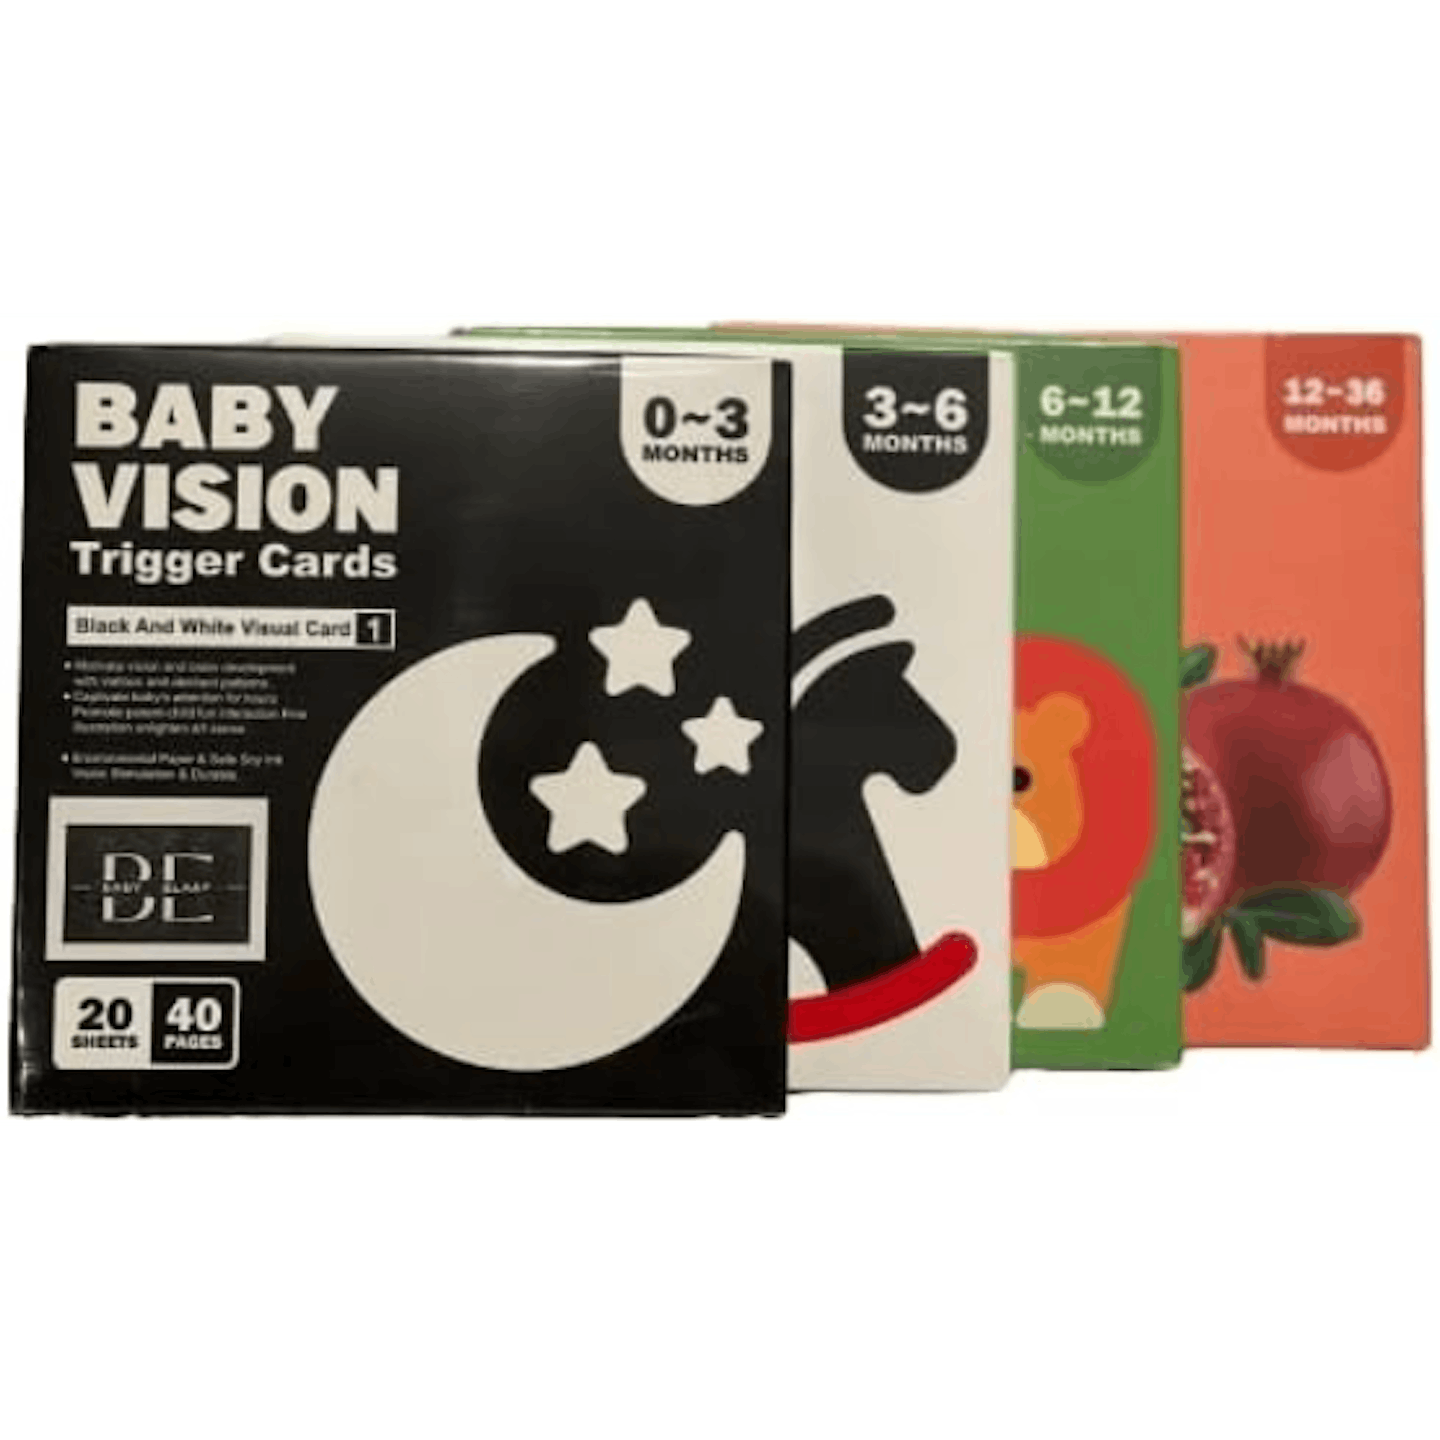 Baby vision cards